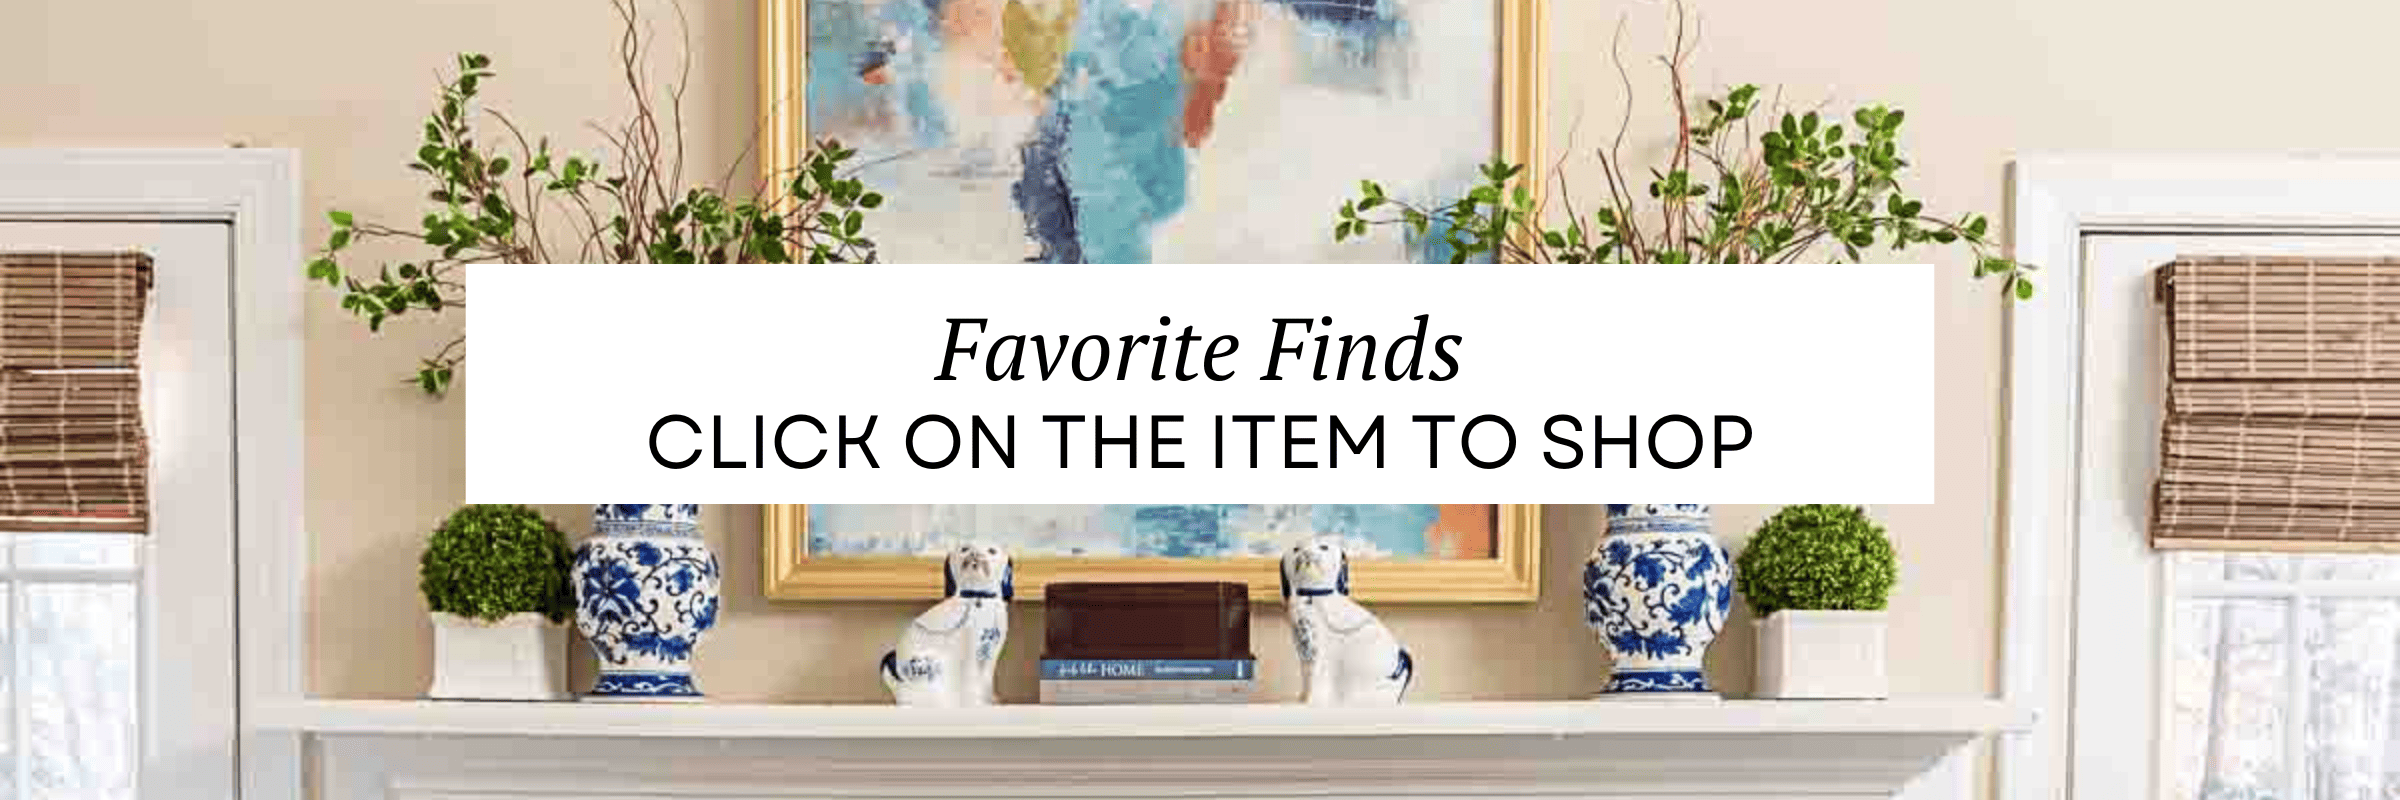 Graphic image for favorite finds shopping header